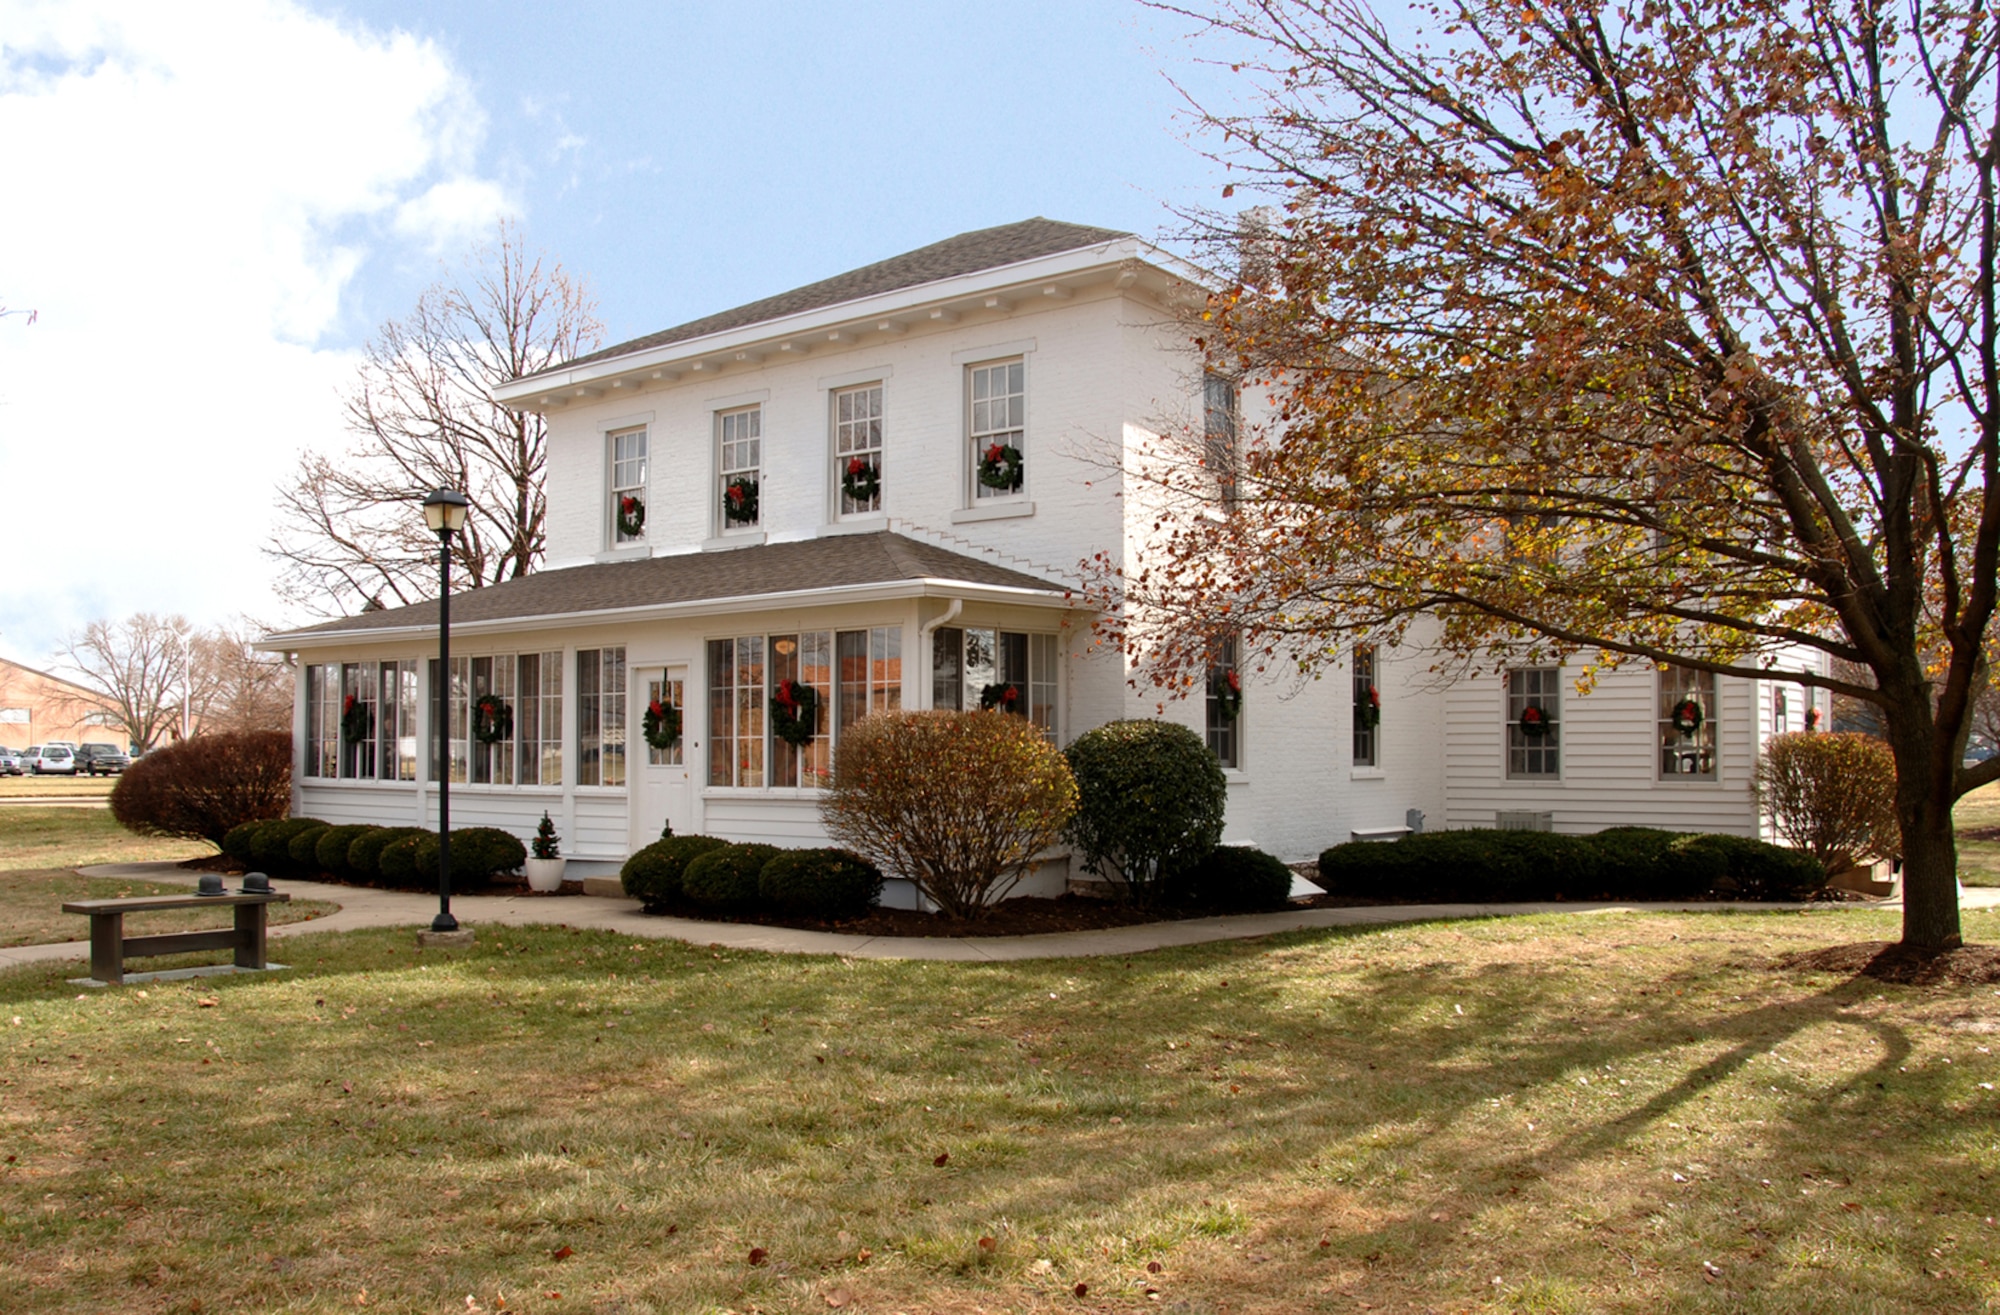 Arnold House, the oldest structure at Wright-Patterson Air Force Base, was originally built by bridge engineer Henry Hebble in 1842.  It was home to a number of notable residents, including Maj. Henry A. "Hap" Arnold.  Arnold would later become the leader of the U.S. Army Air Forces during World War II and the Air Force's only five-star general. The home is now a heritage center used for special events. (Air Force photo by Ben Strasser) 